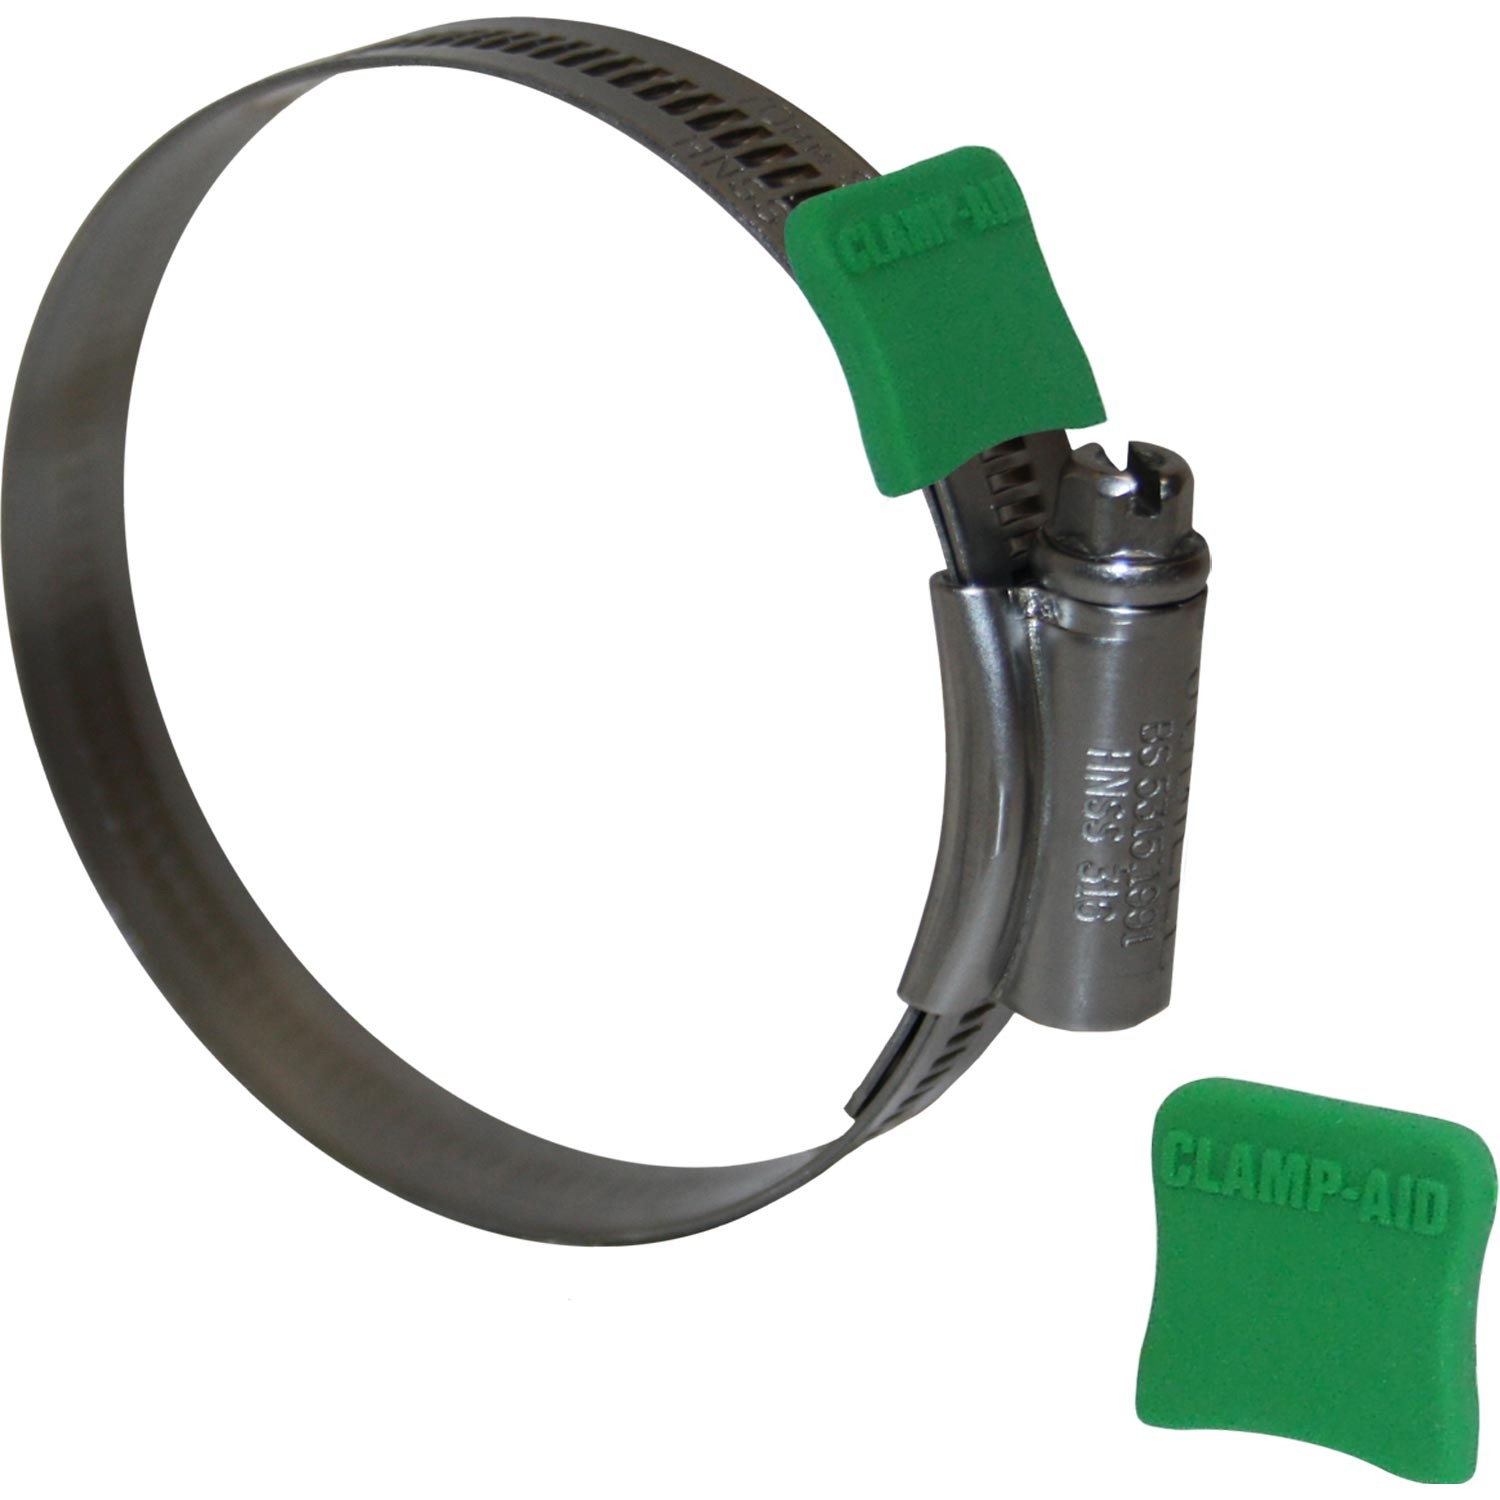 Green Industrial Safety Protectors caps for Worm drive hose clamps by CLAMP-AID 